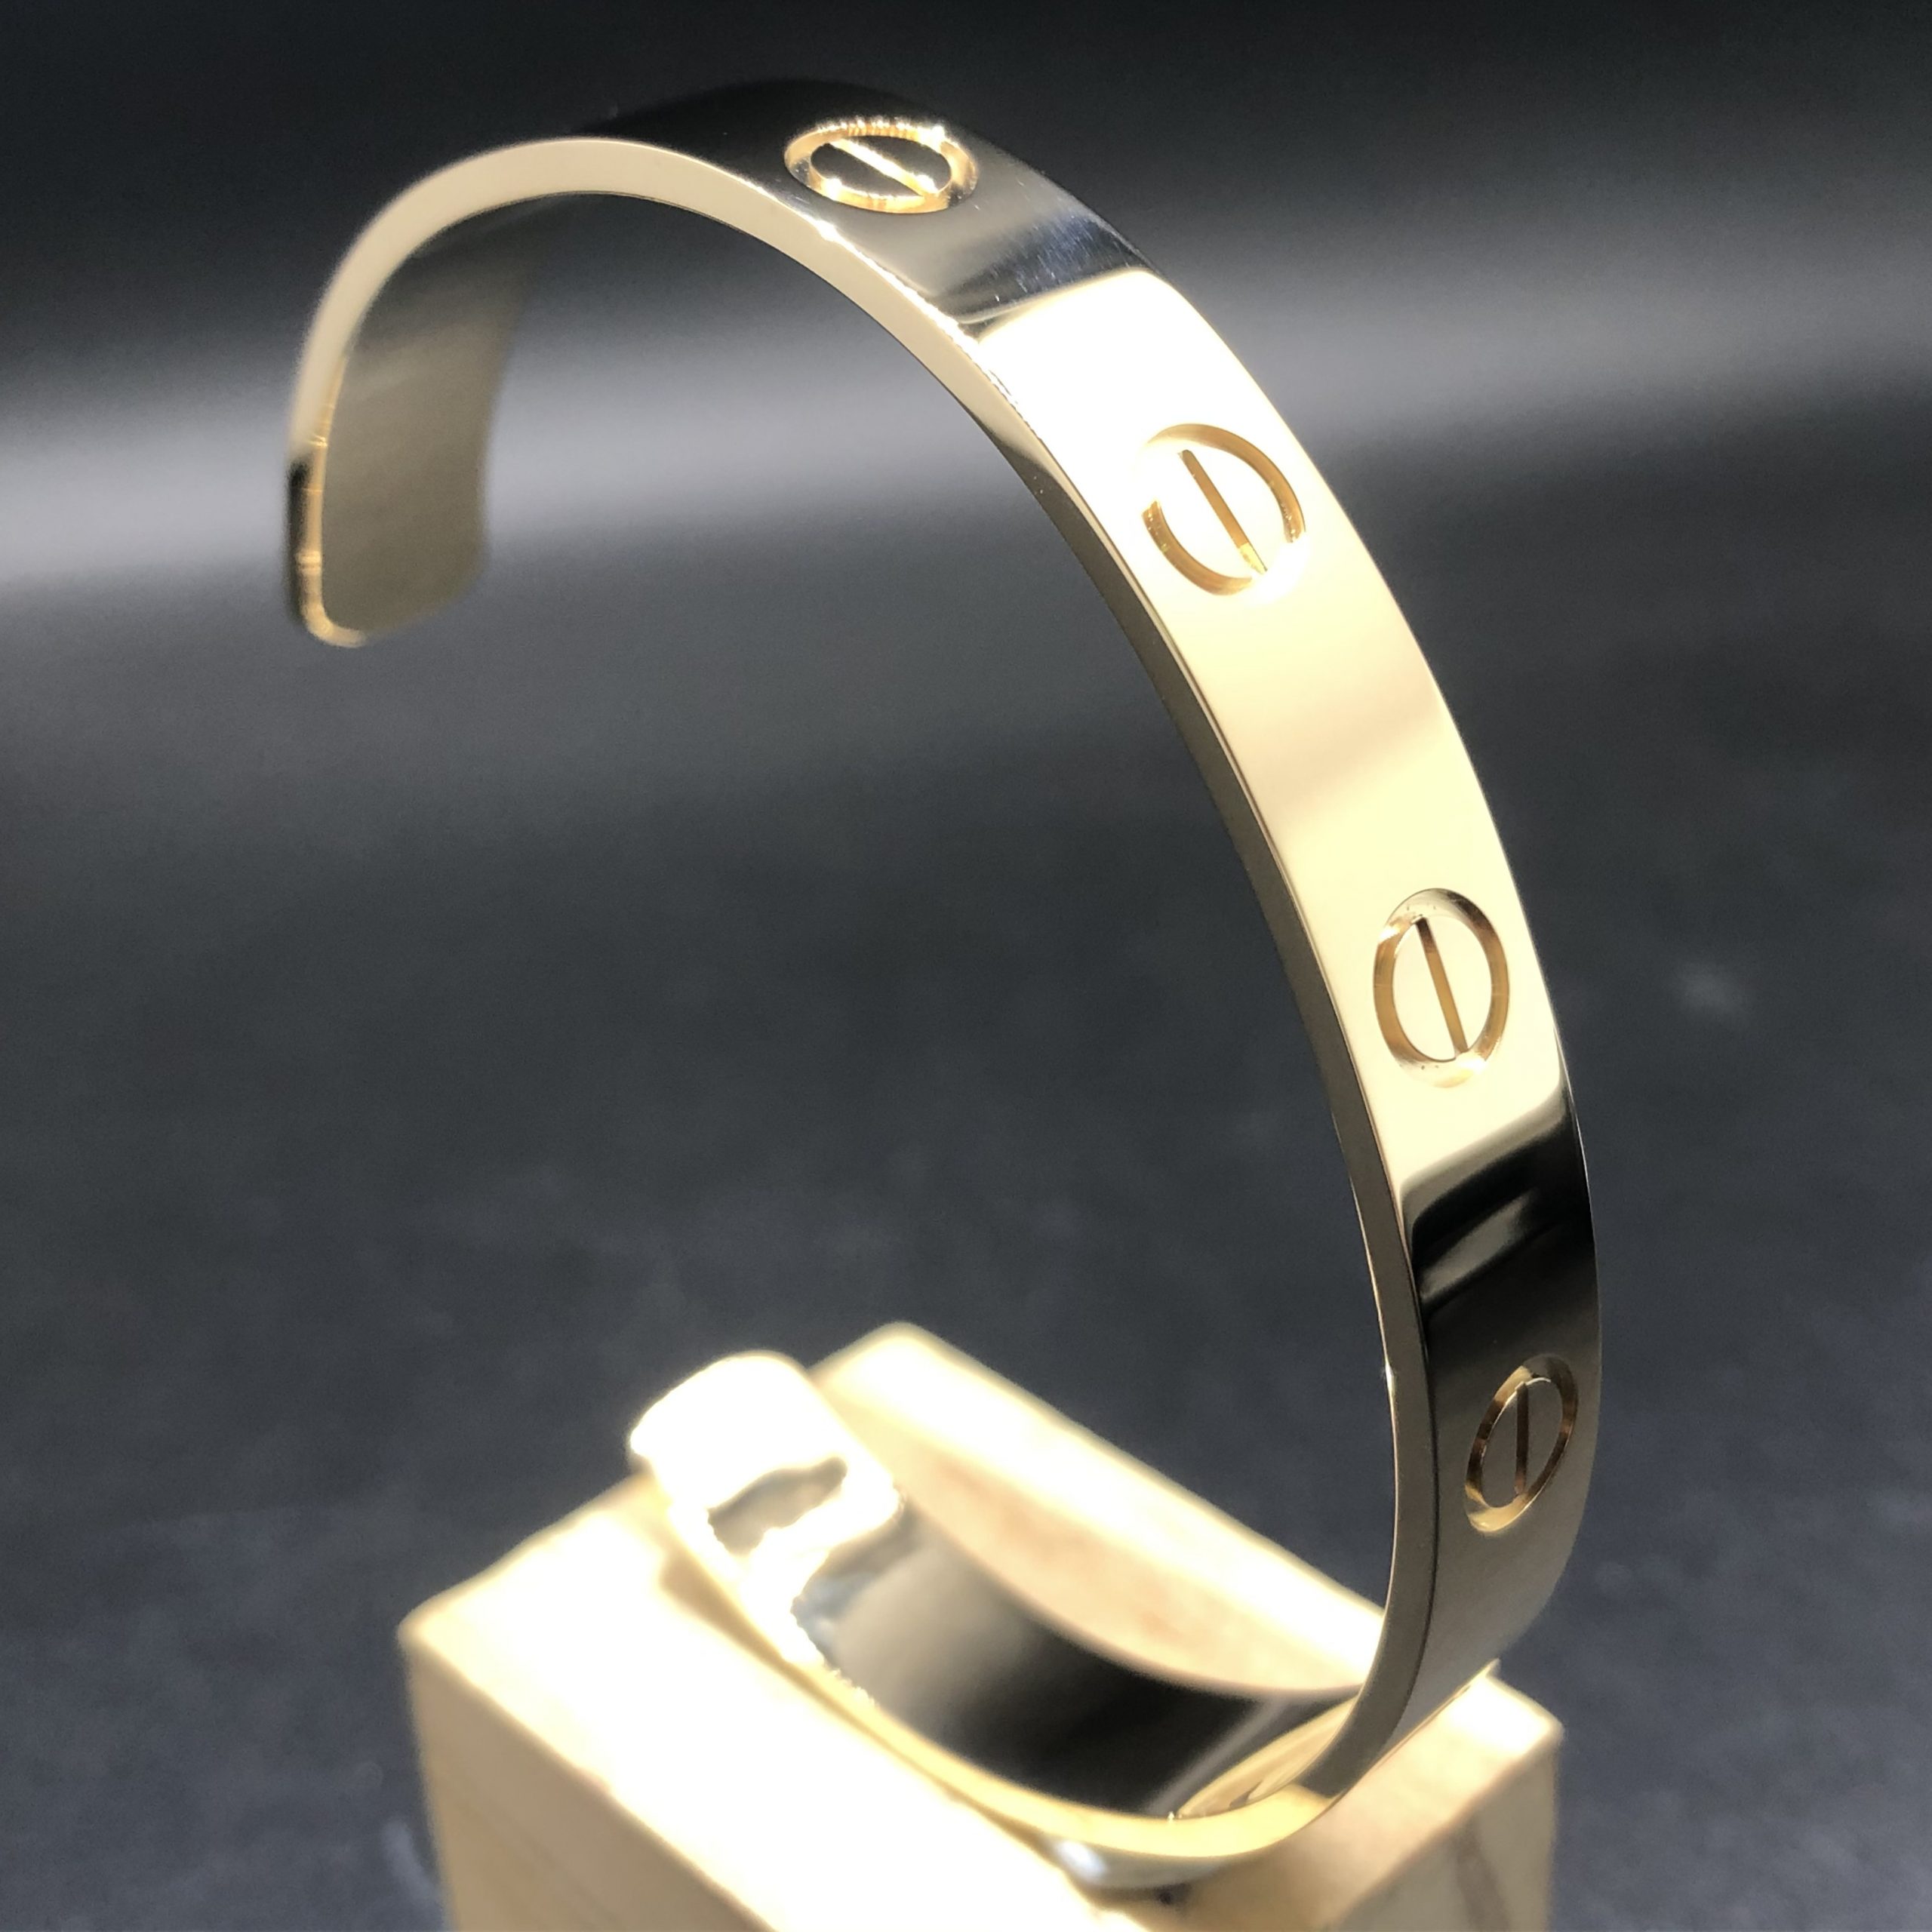 Custom Made Cartier Love Cuff Bracelet in Solid 18K Yellow Gold